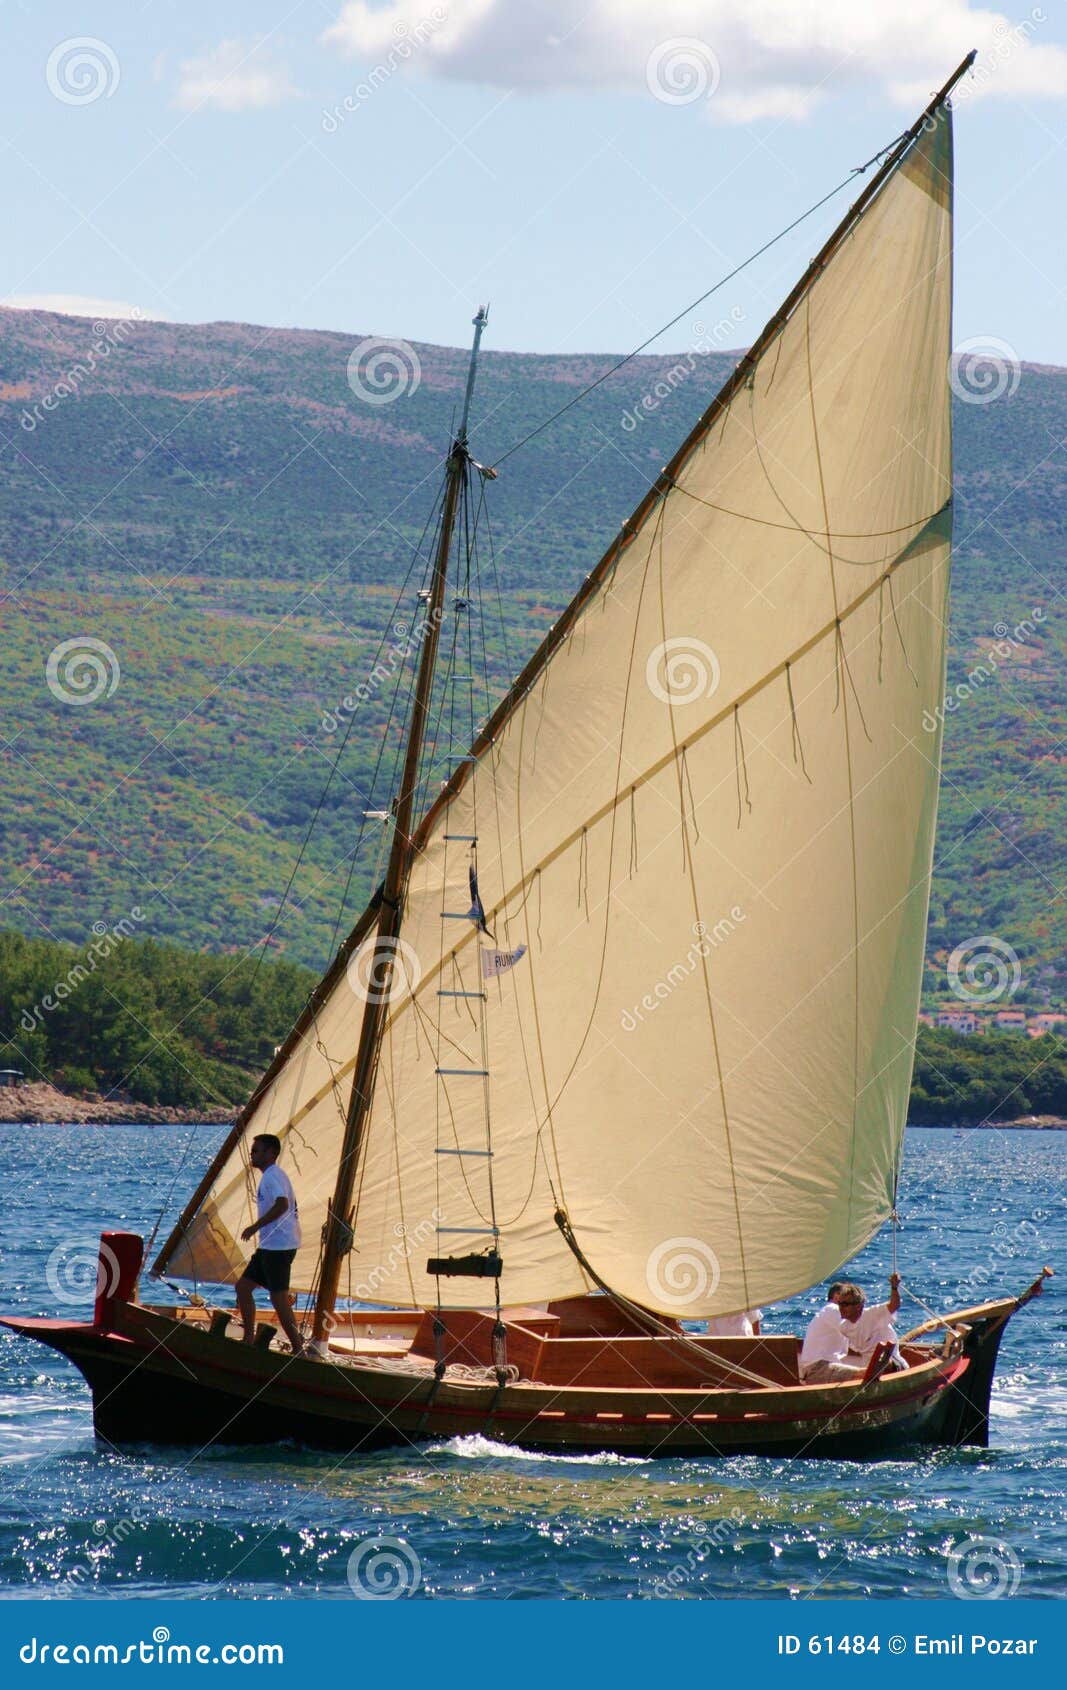 Vintage sail boat stock photo. Image of yacht, sails 